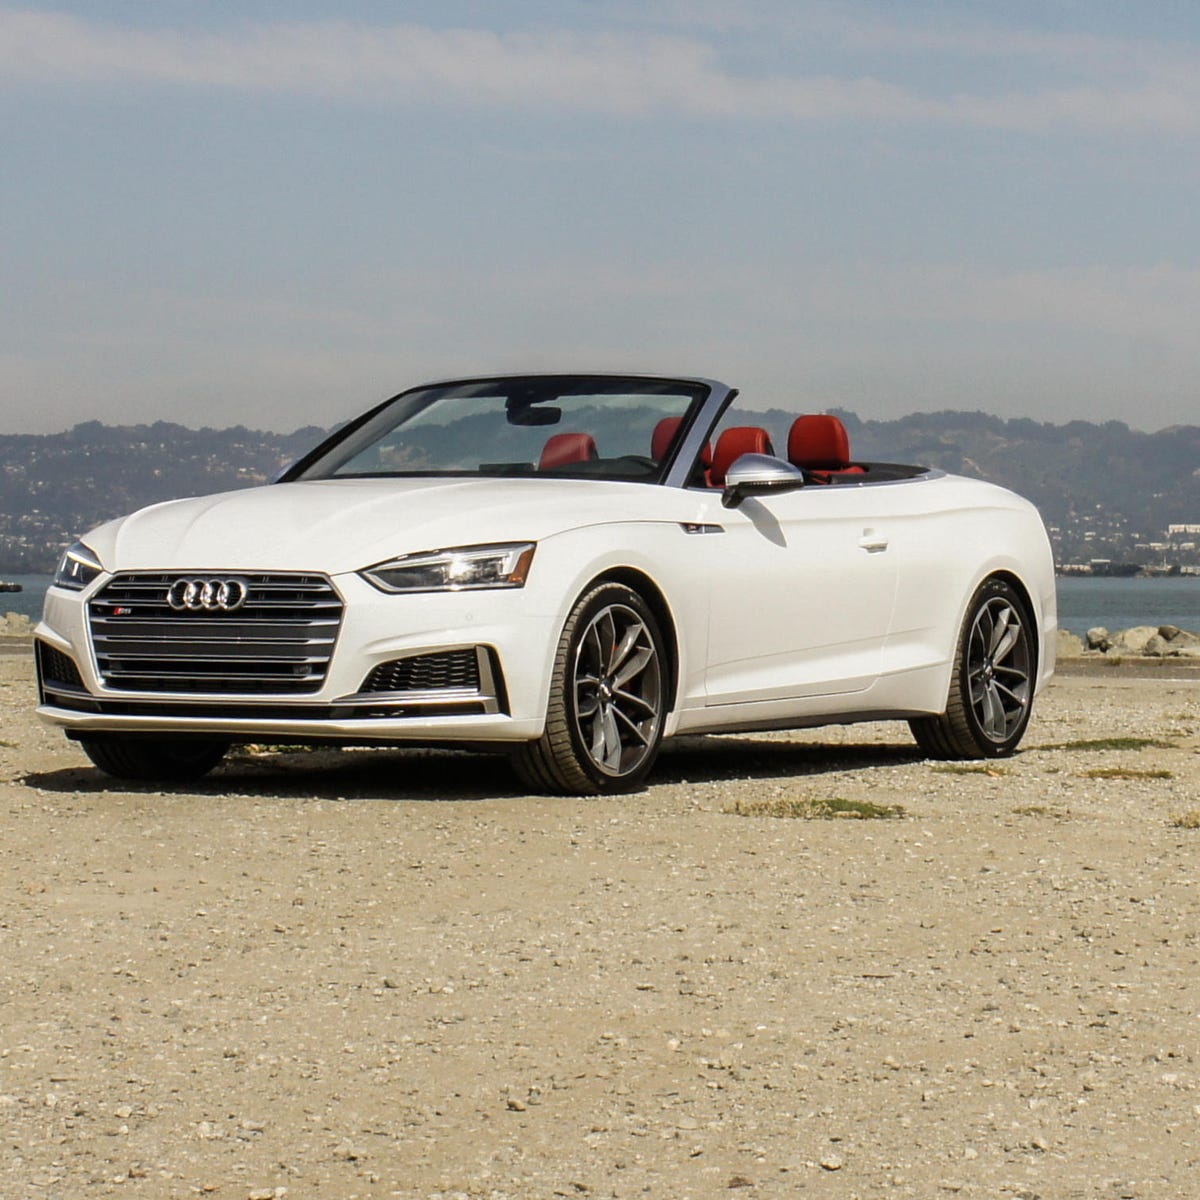 2018 Audi S5 Cabriolet 3.0 TFSI Prestige review: Audi's rag-top gets  everything right - CNET